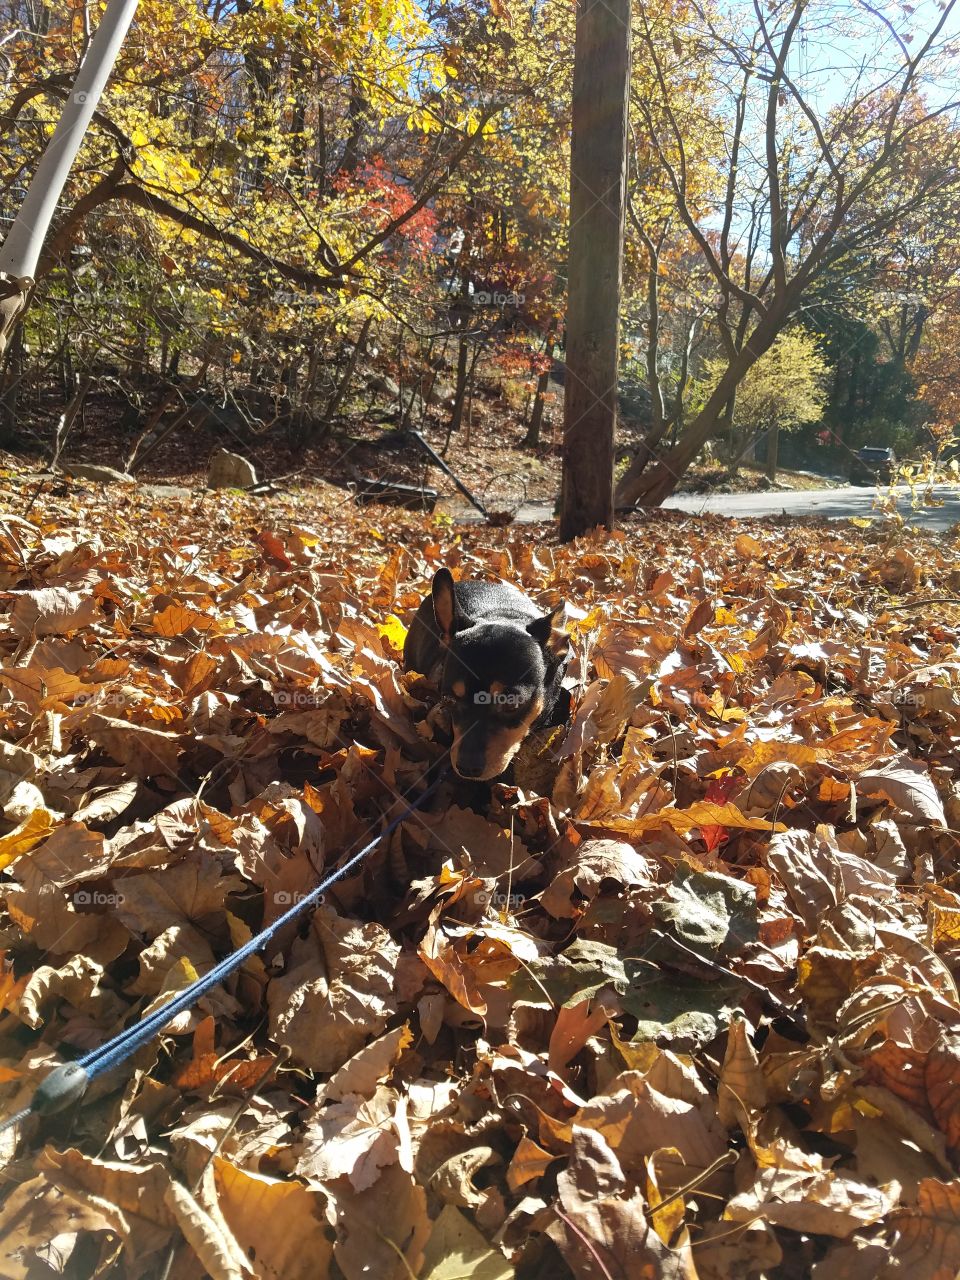 Miniature Pinscher in a pile of leaves